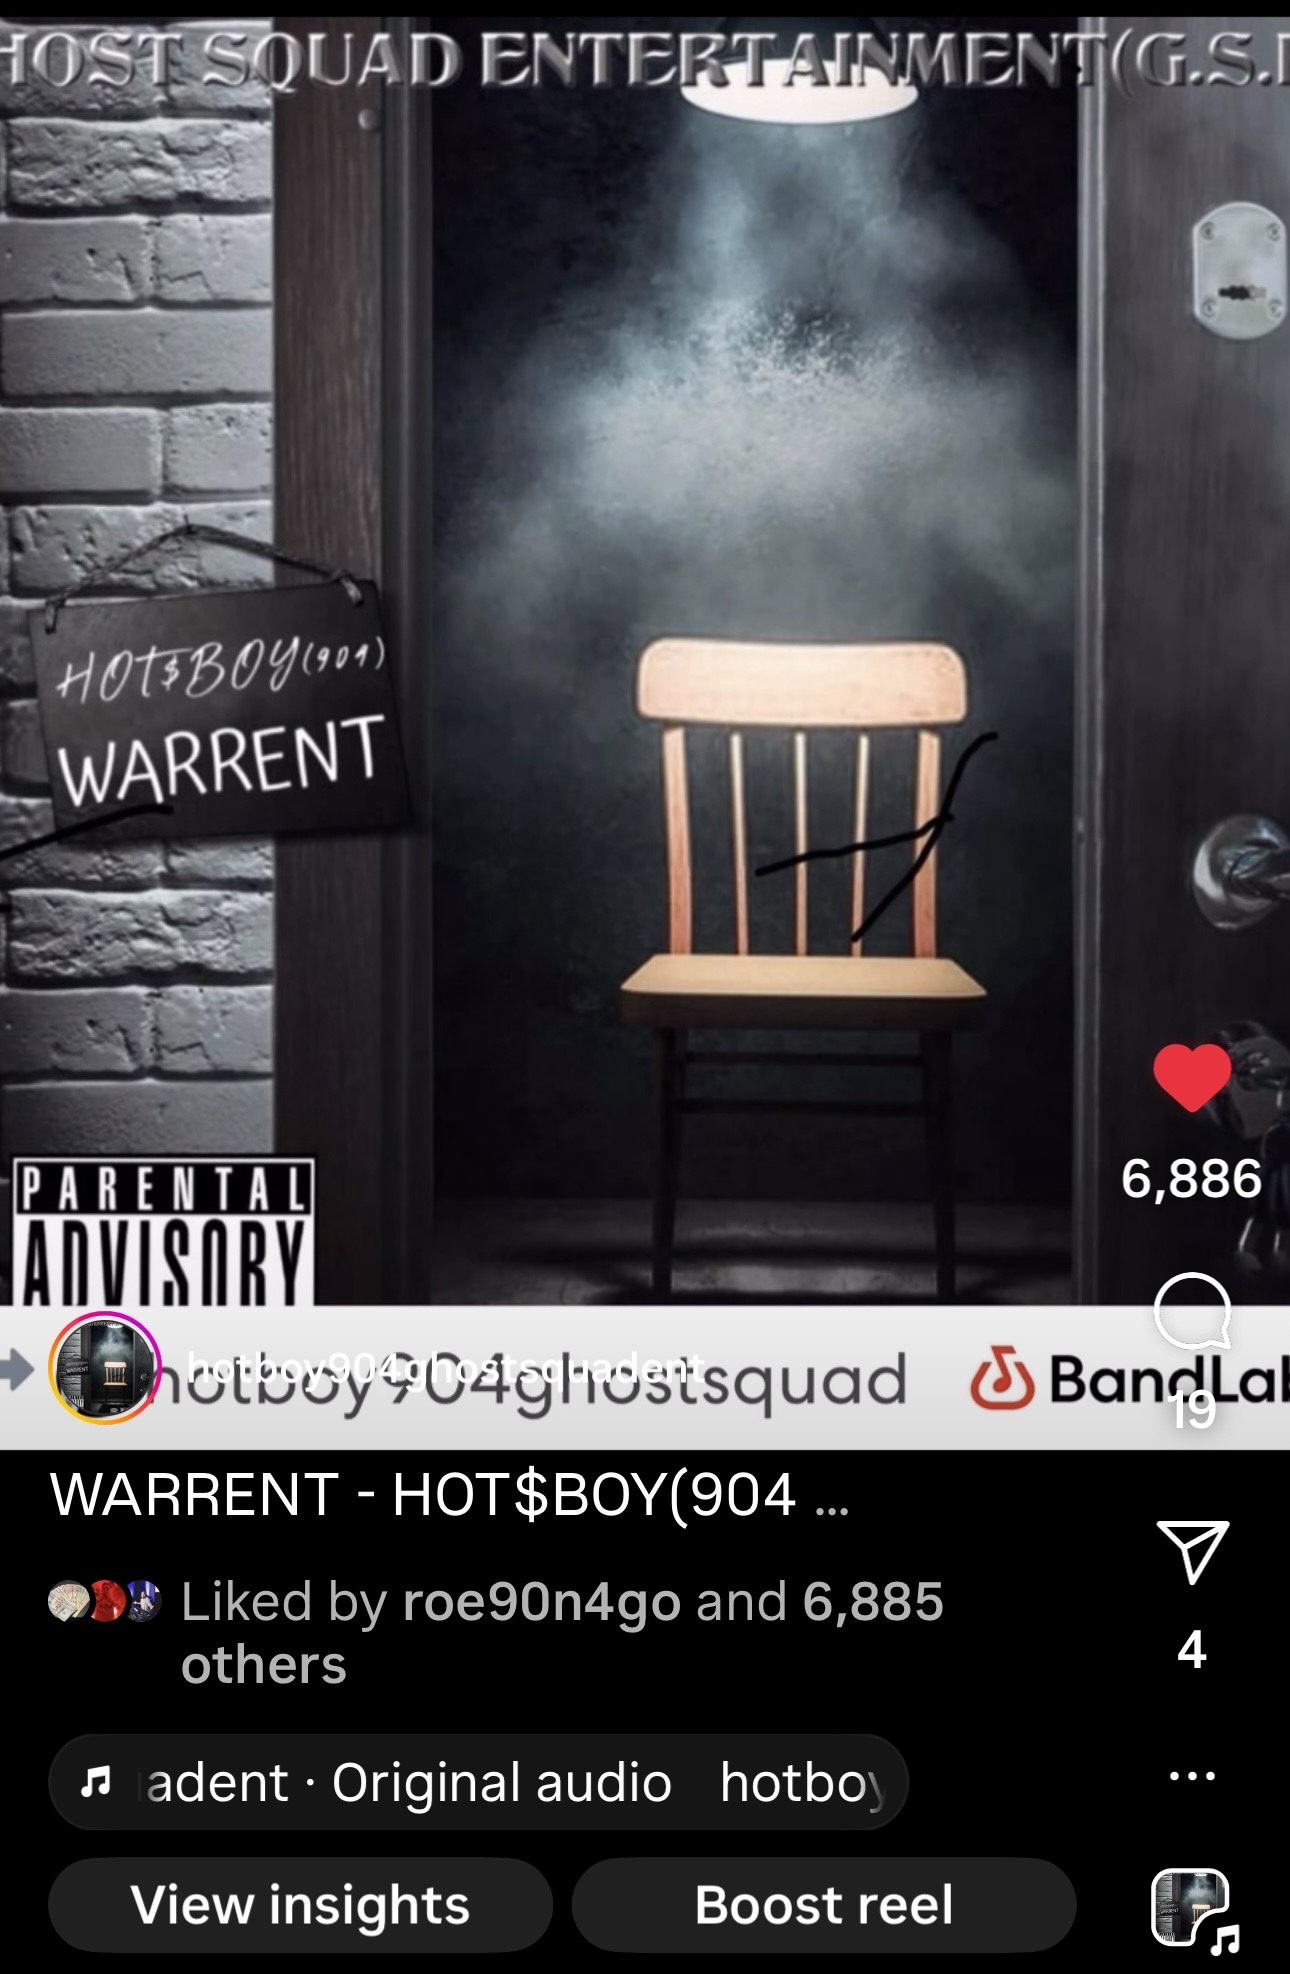 BE ON THE LOOKOUT FOR THIS SONG BY HOT$BOY(904) G.S.E “ WARRENT “ A TRENDING TRACK THAT HAS EVERYONE TALKING ABOUT THIS AMAZING SONG‼️